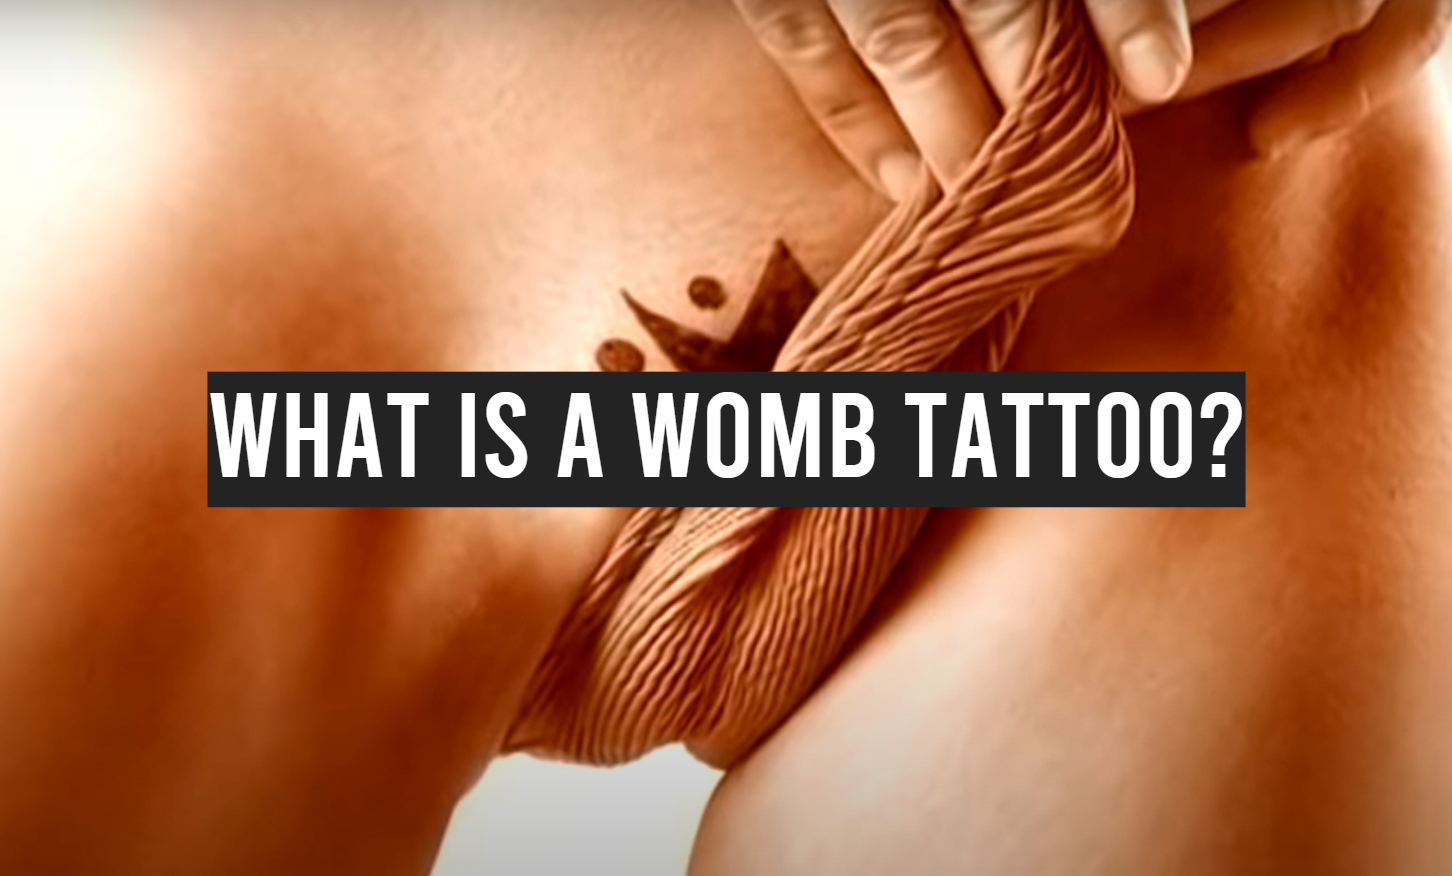 What is a Womb Tattoo?